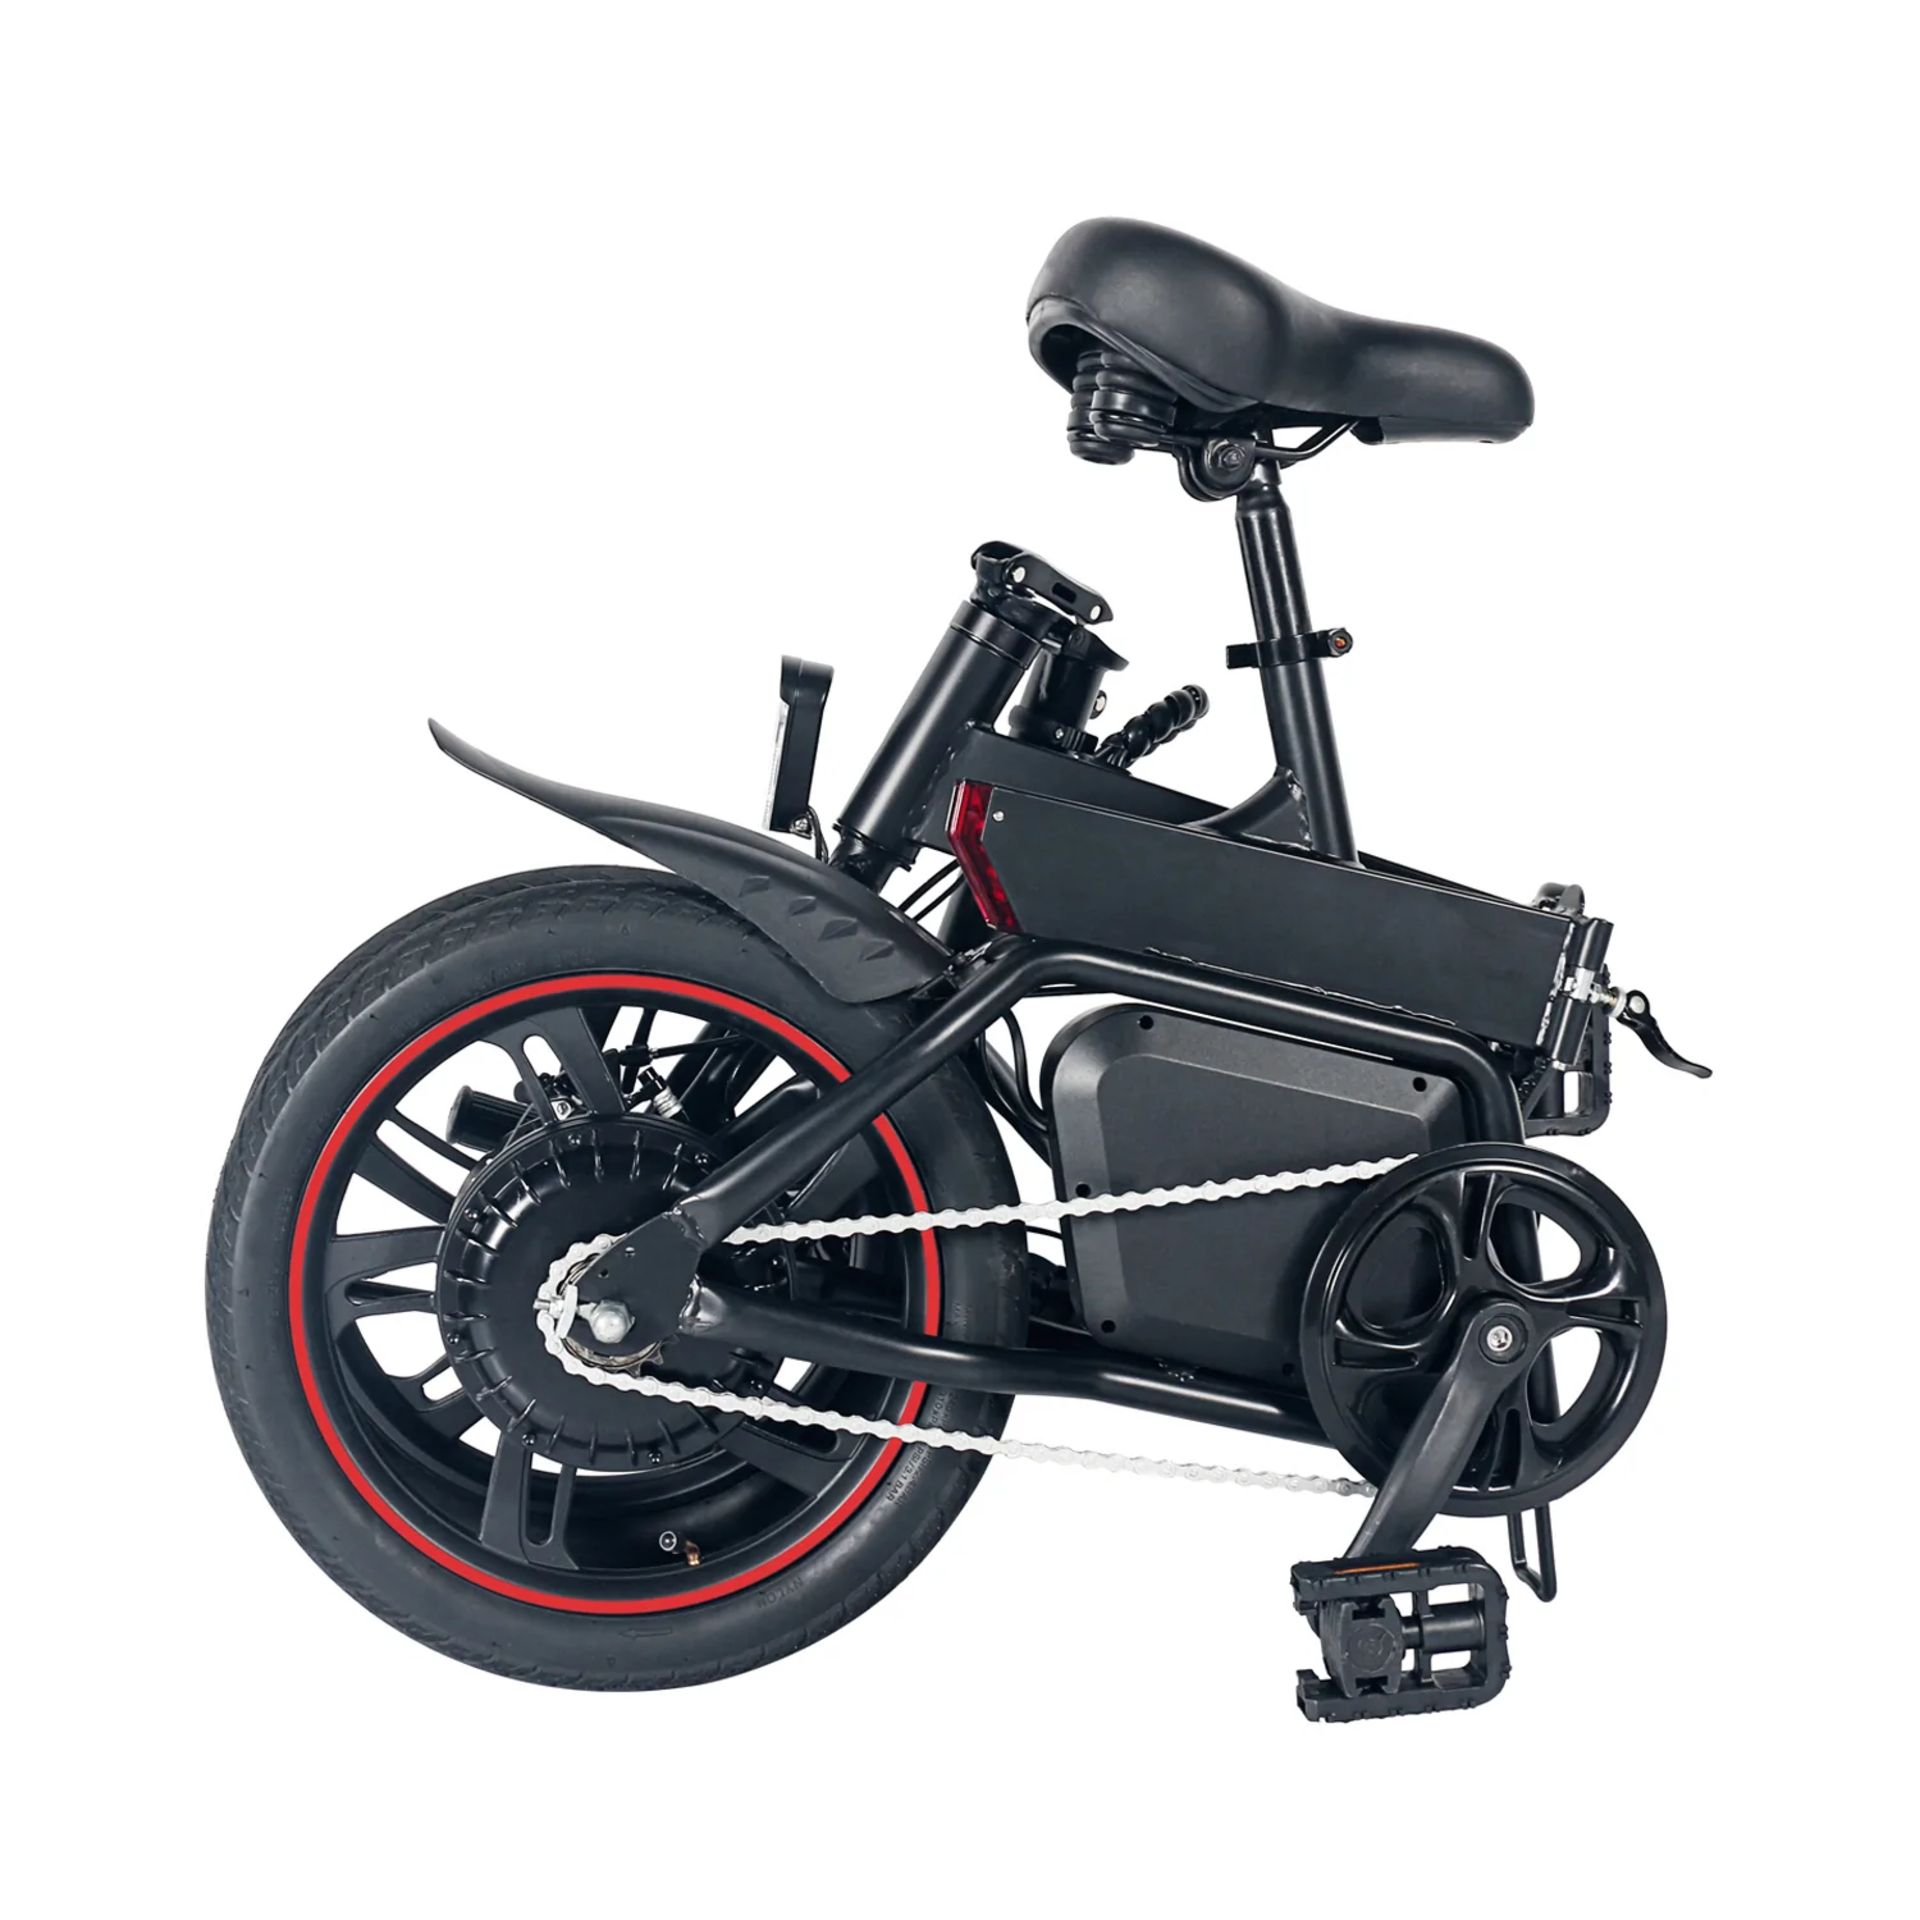 5 X Windgoo B20 Pro Electric Bike. RRP £1,100.99. With 16-inch-wide tires and a frame of upgraded - Image 7 of 7